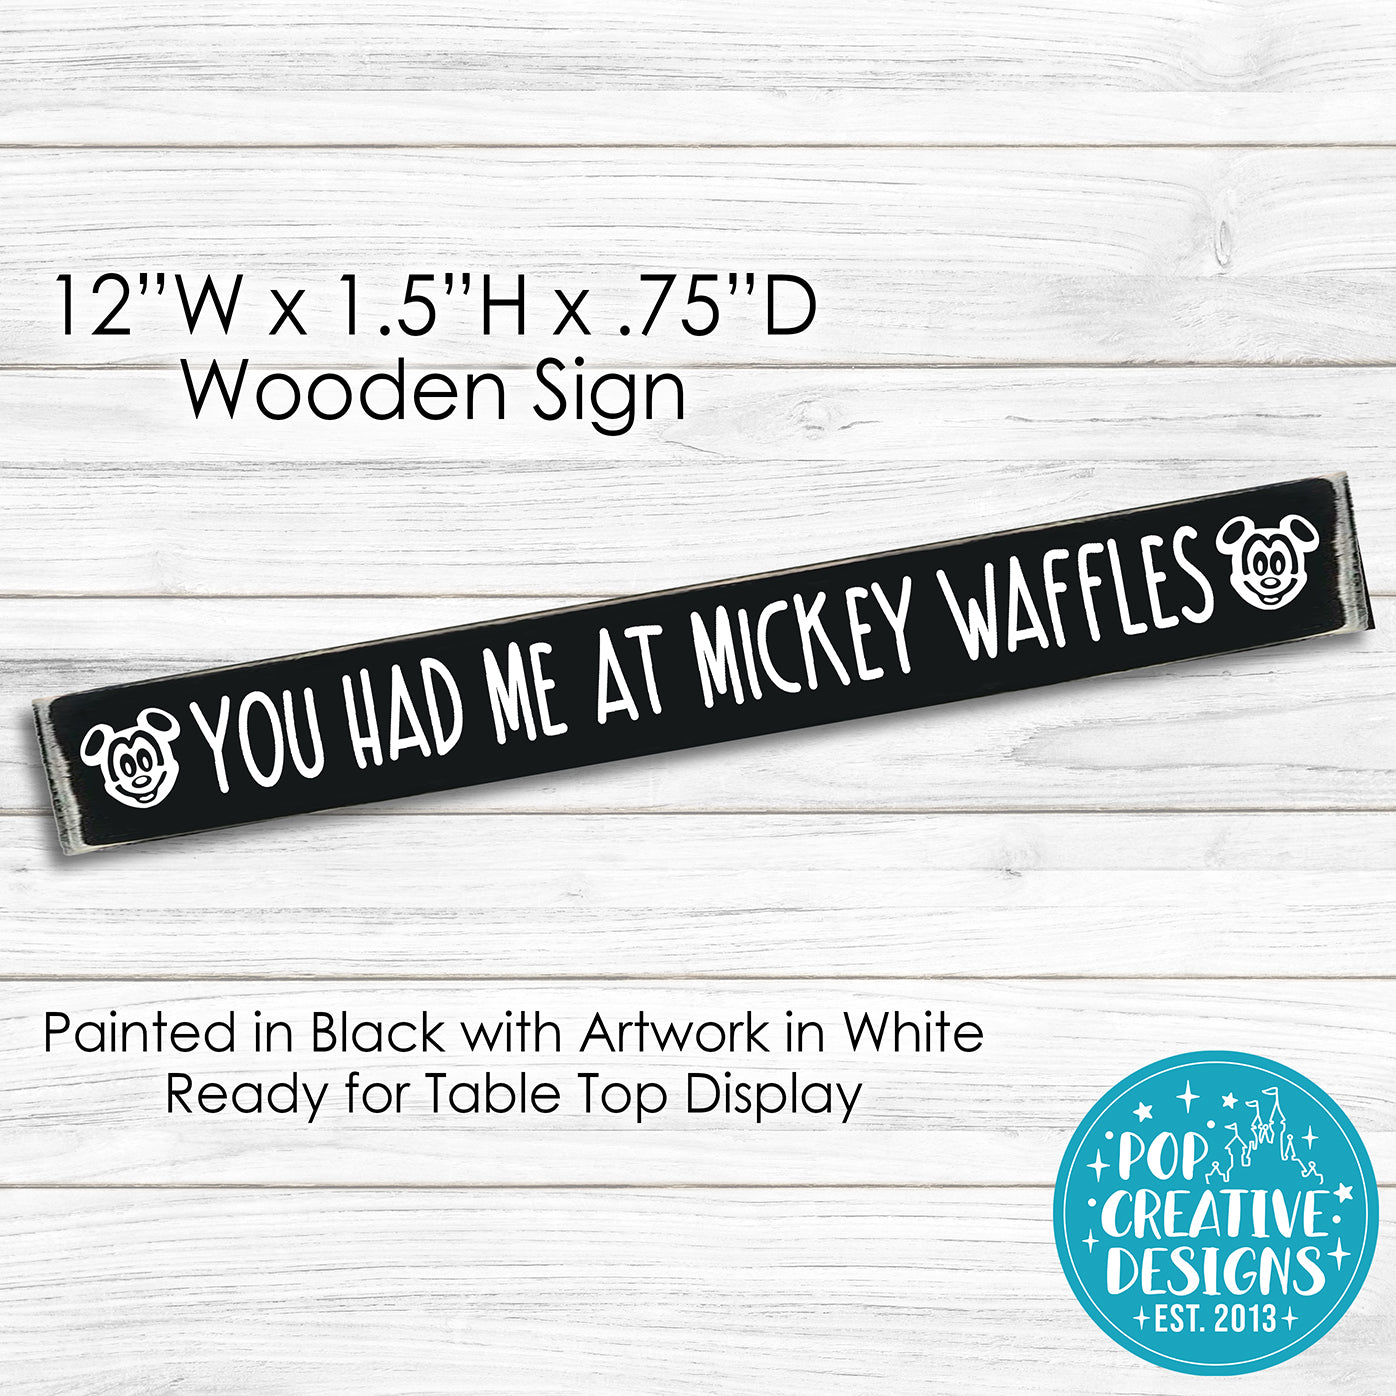 You Had Me At Mouse Waffles Wooden Sign